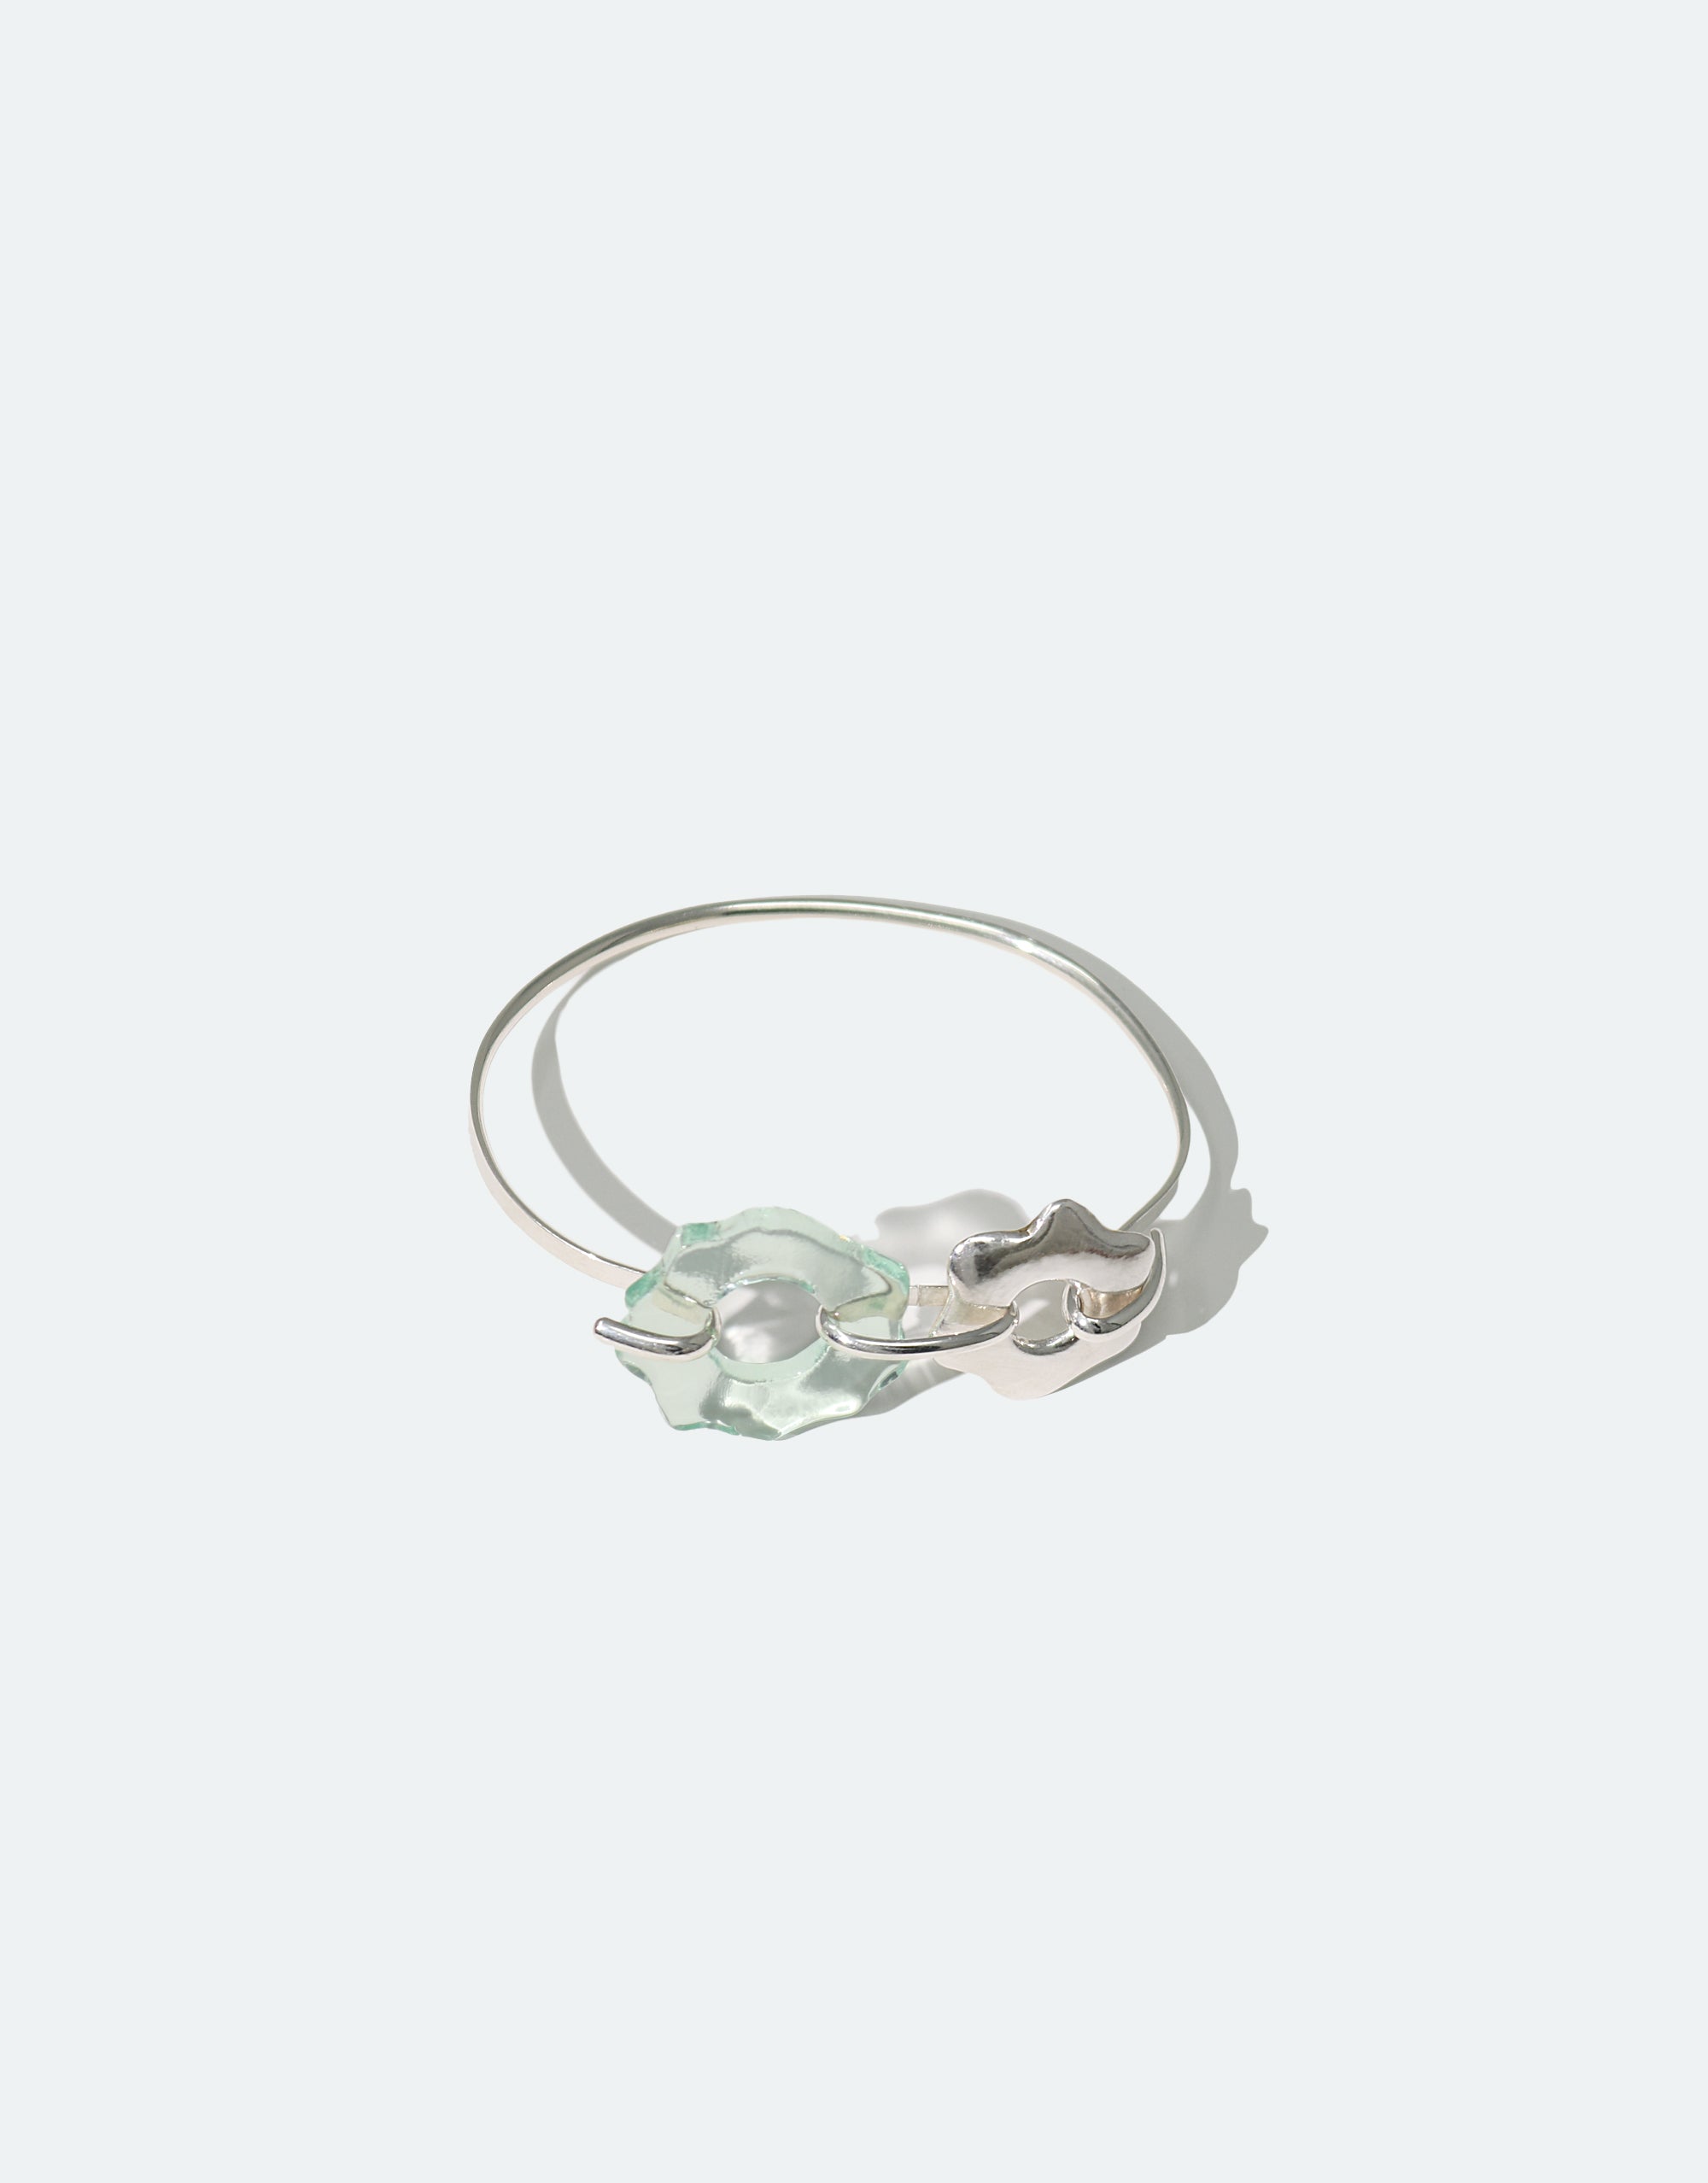 CLED Eco Conscious Sustainable upcycled jewelry made from Eco Gems and sterling silver from recycled glass | Avens Cuff Bracelet